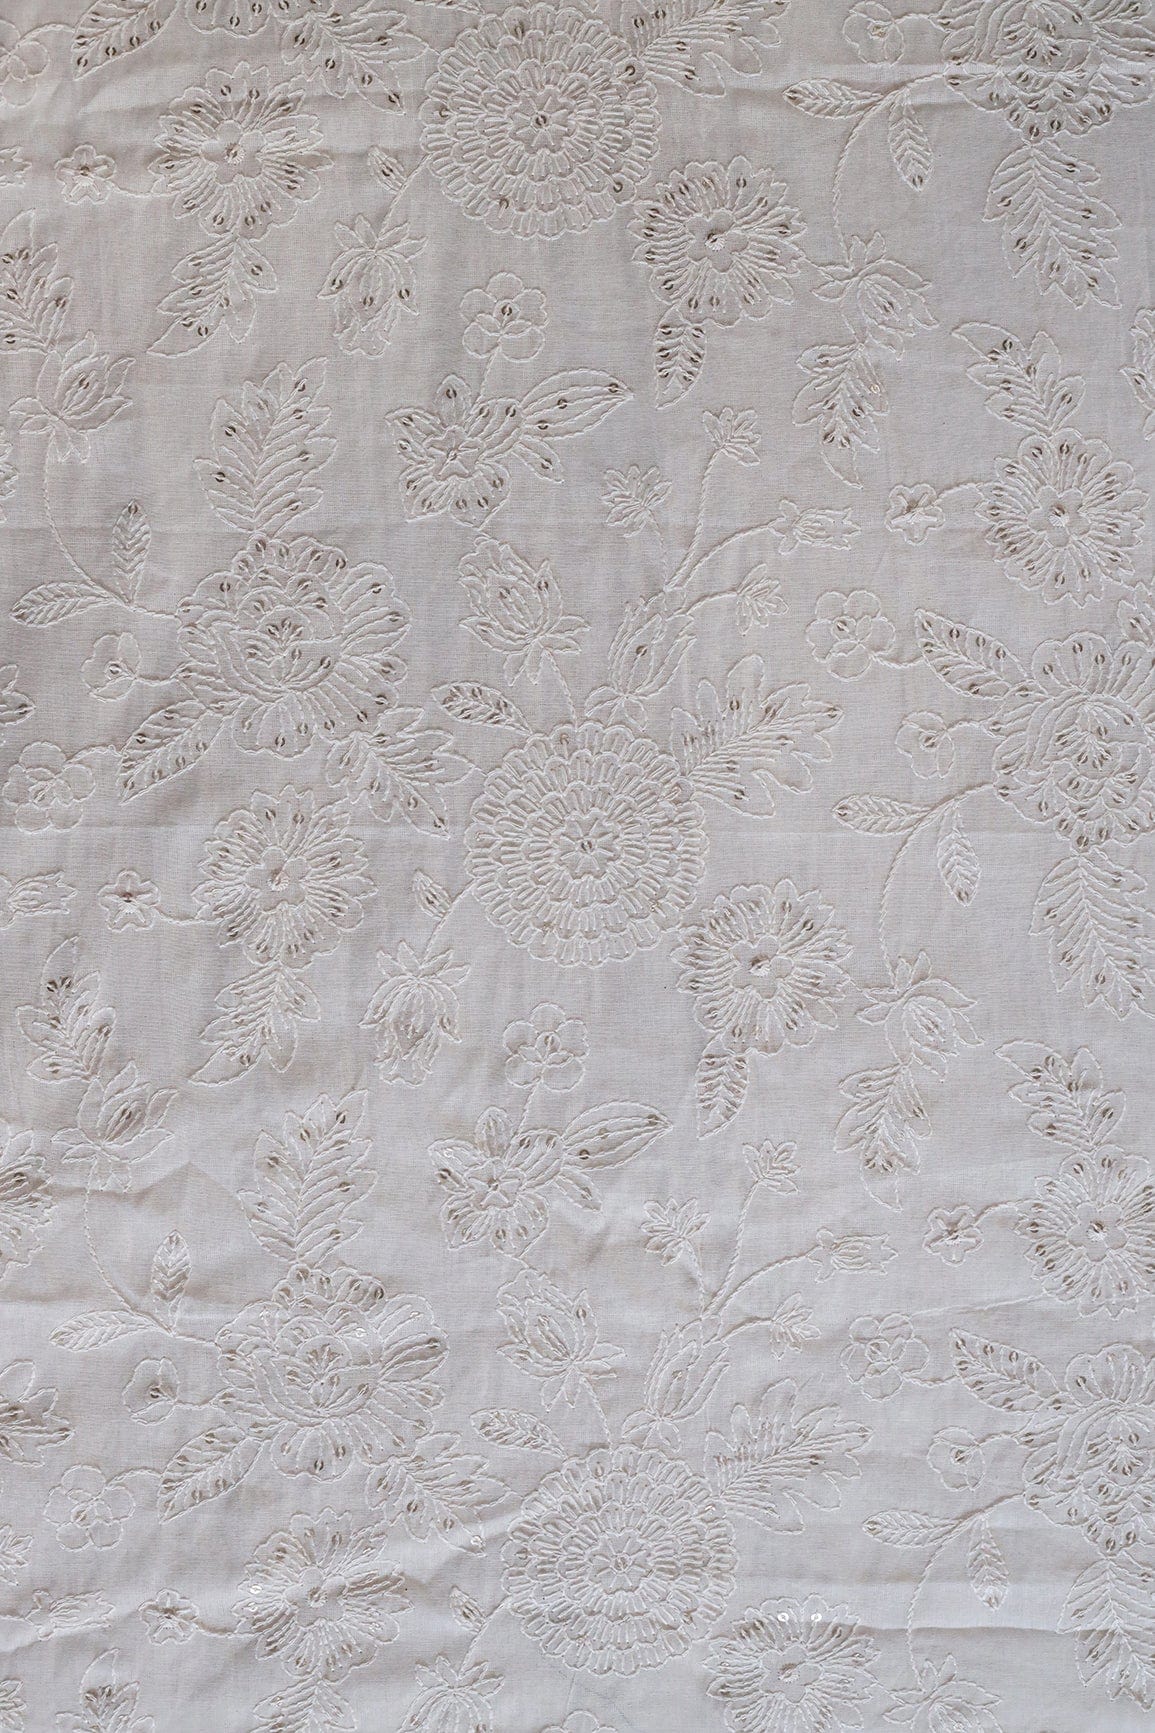 doeraa Embroidery Fabrics White Thread With Gold Sequins Heavy Floral Embroidery Work On White Cotton Fabric